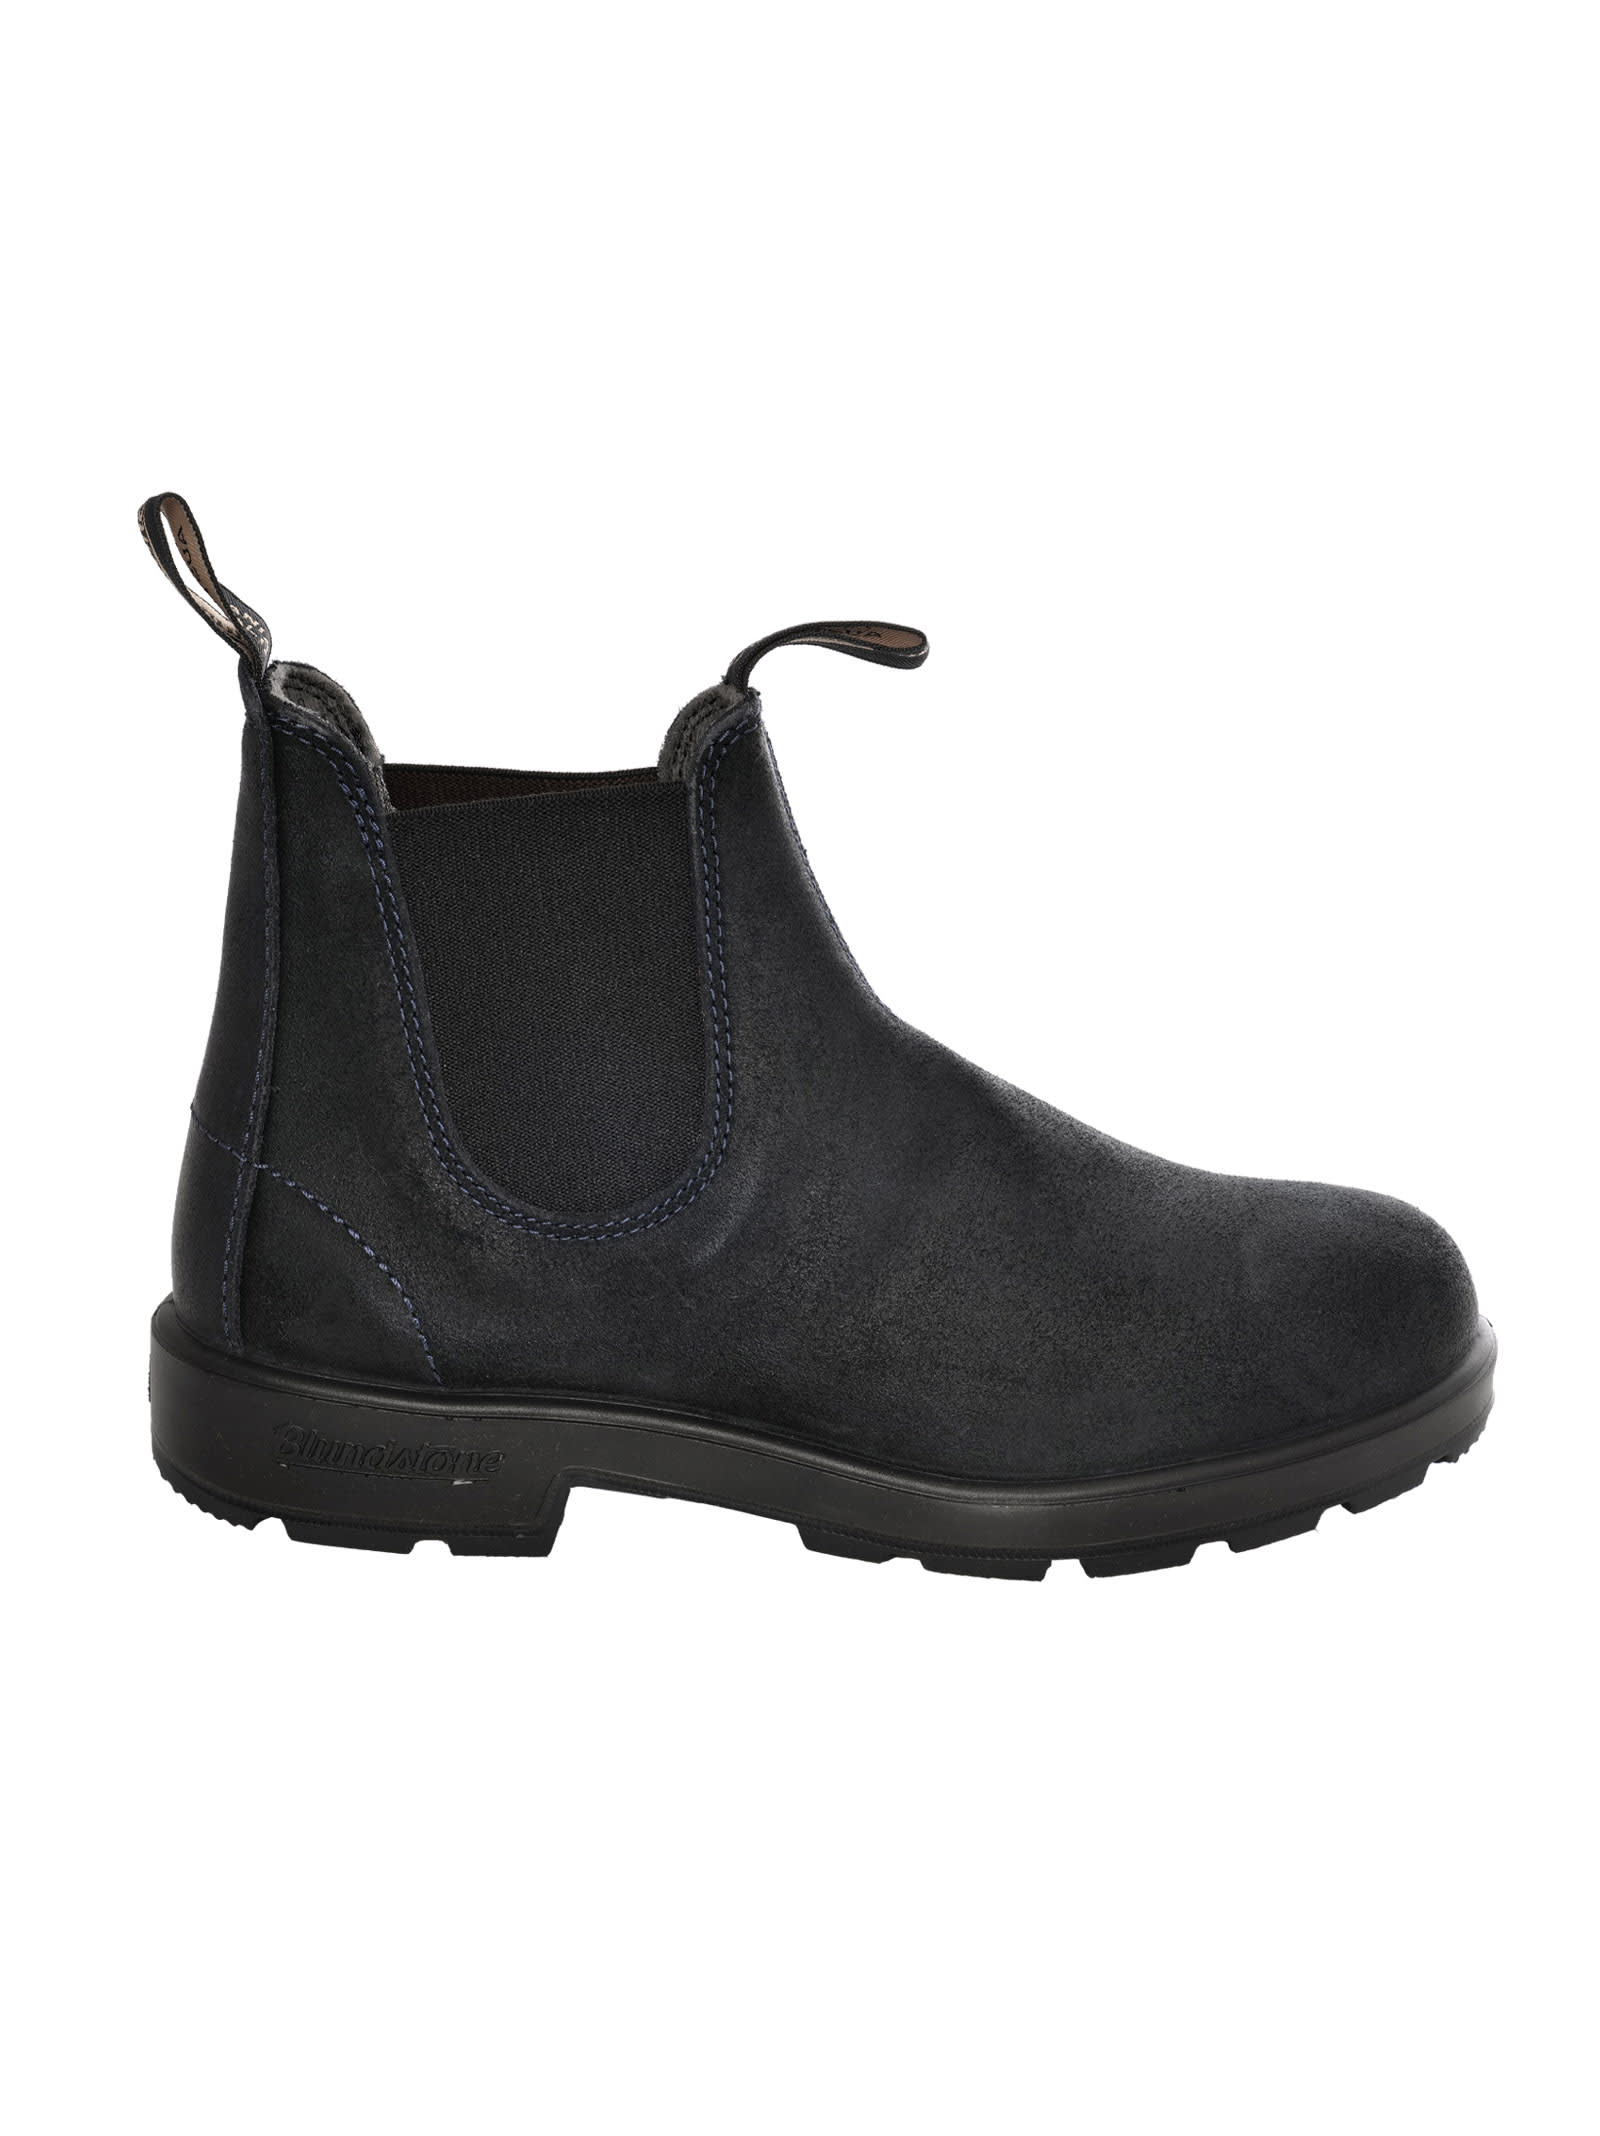 Blundstone Classic Boots